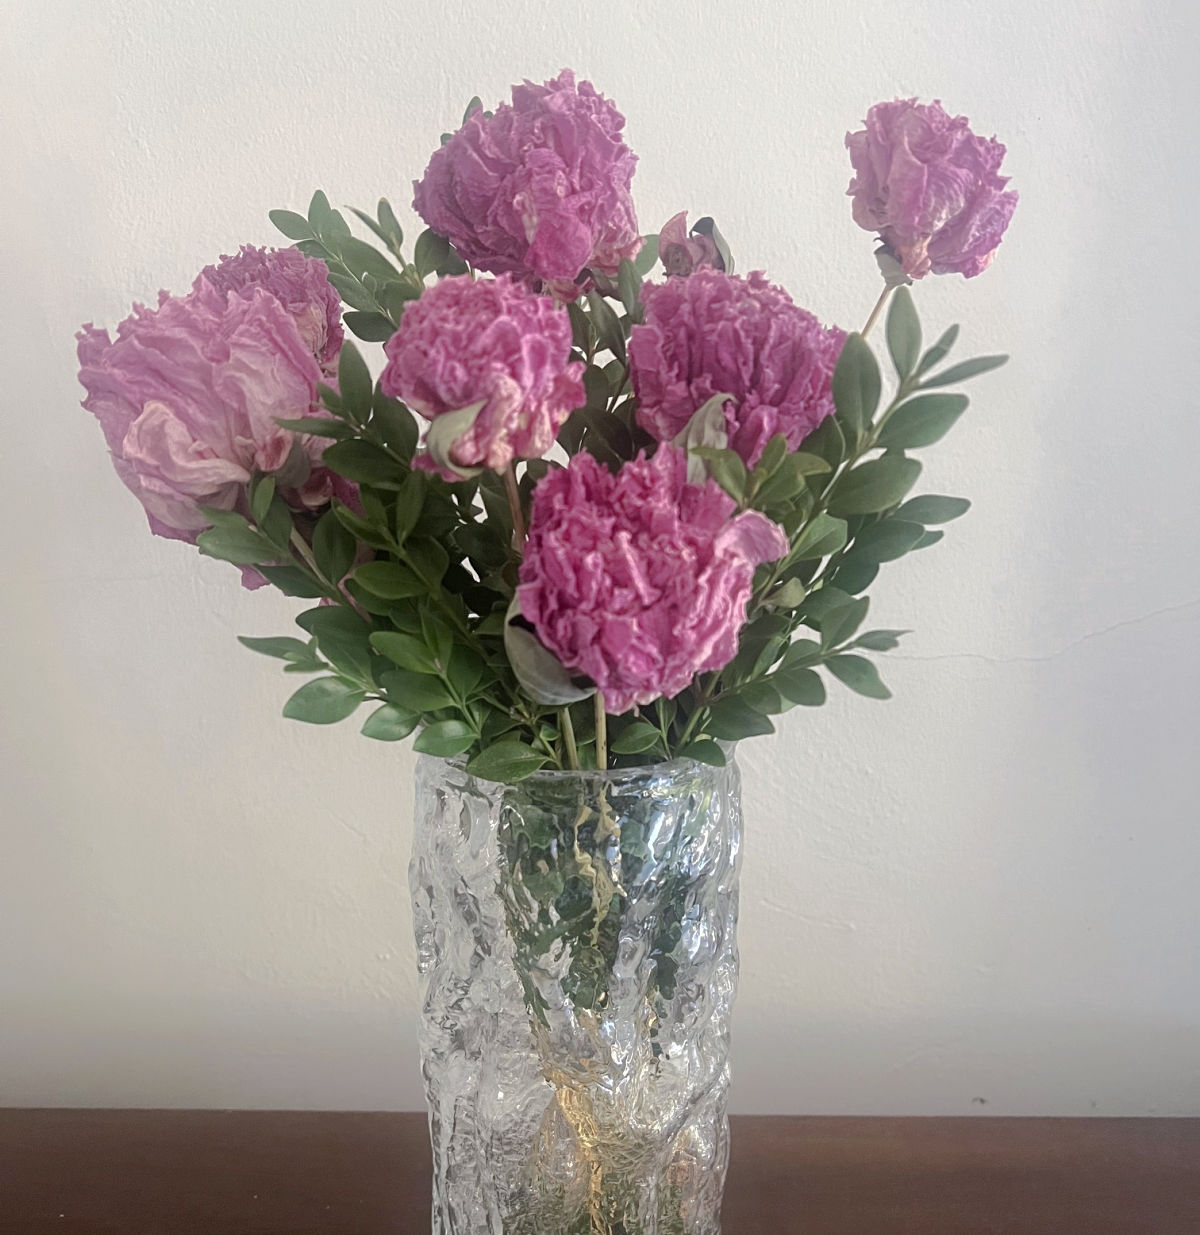 some beautifully dried pink peonies with some fresh green boxwood clippings in a clear vase.